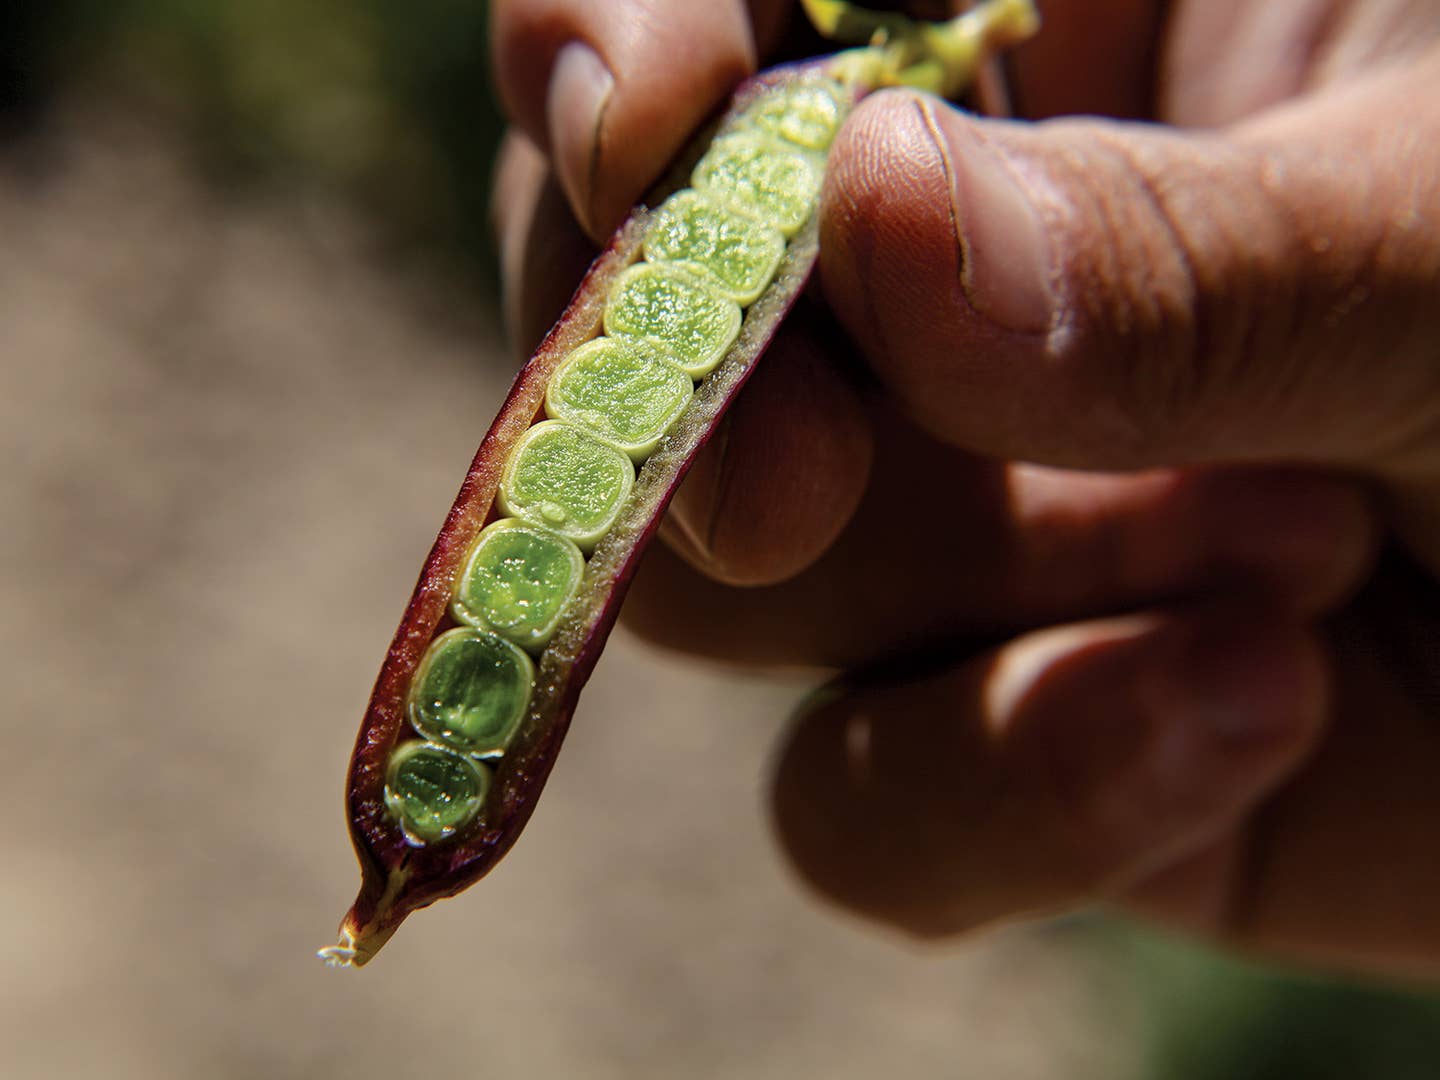 The Inventor of the Snap Pea Has a Farm (and Story) You Wouldn’t Believe